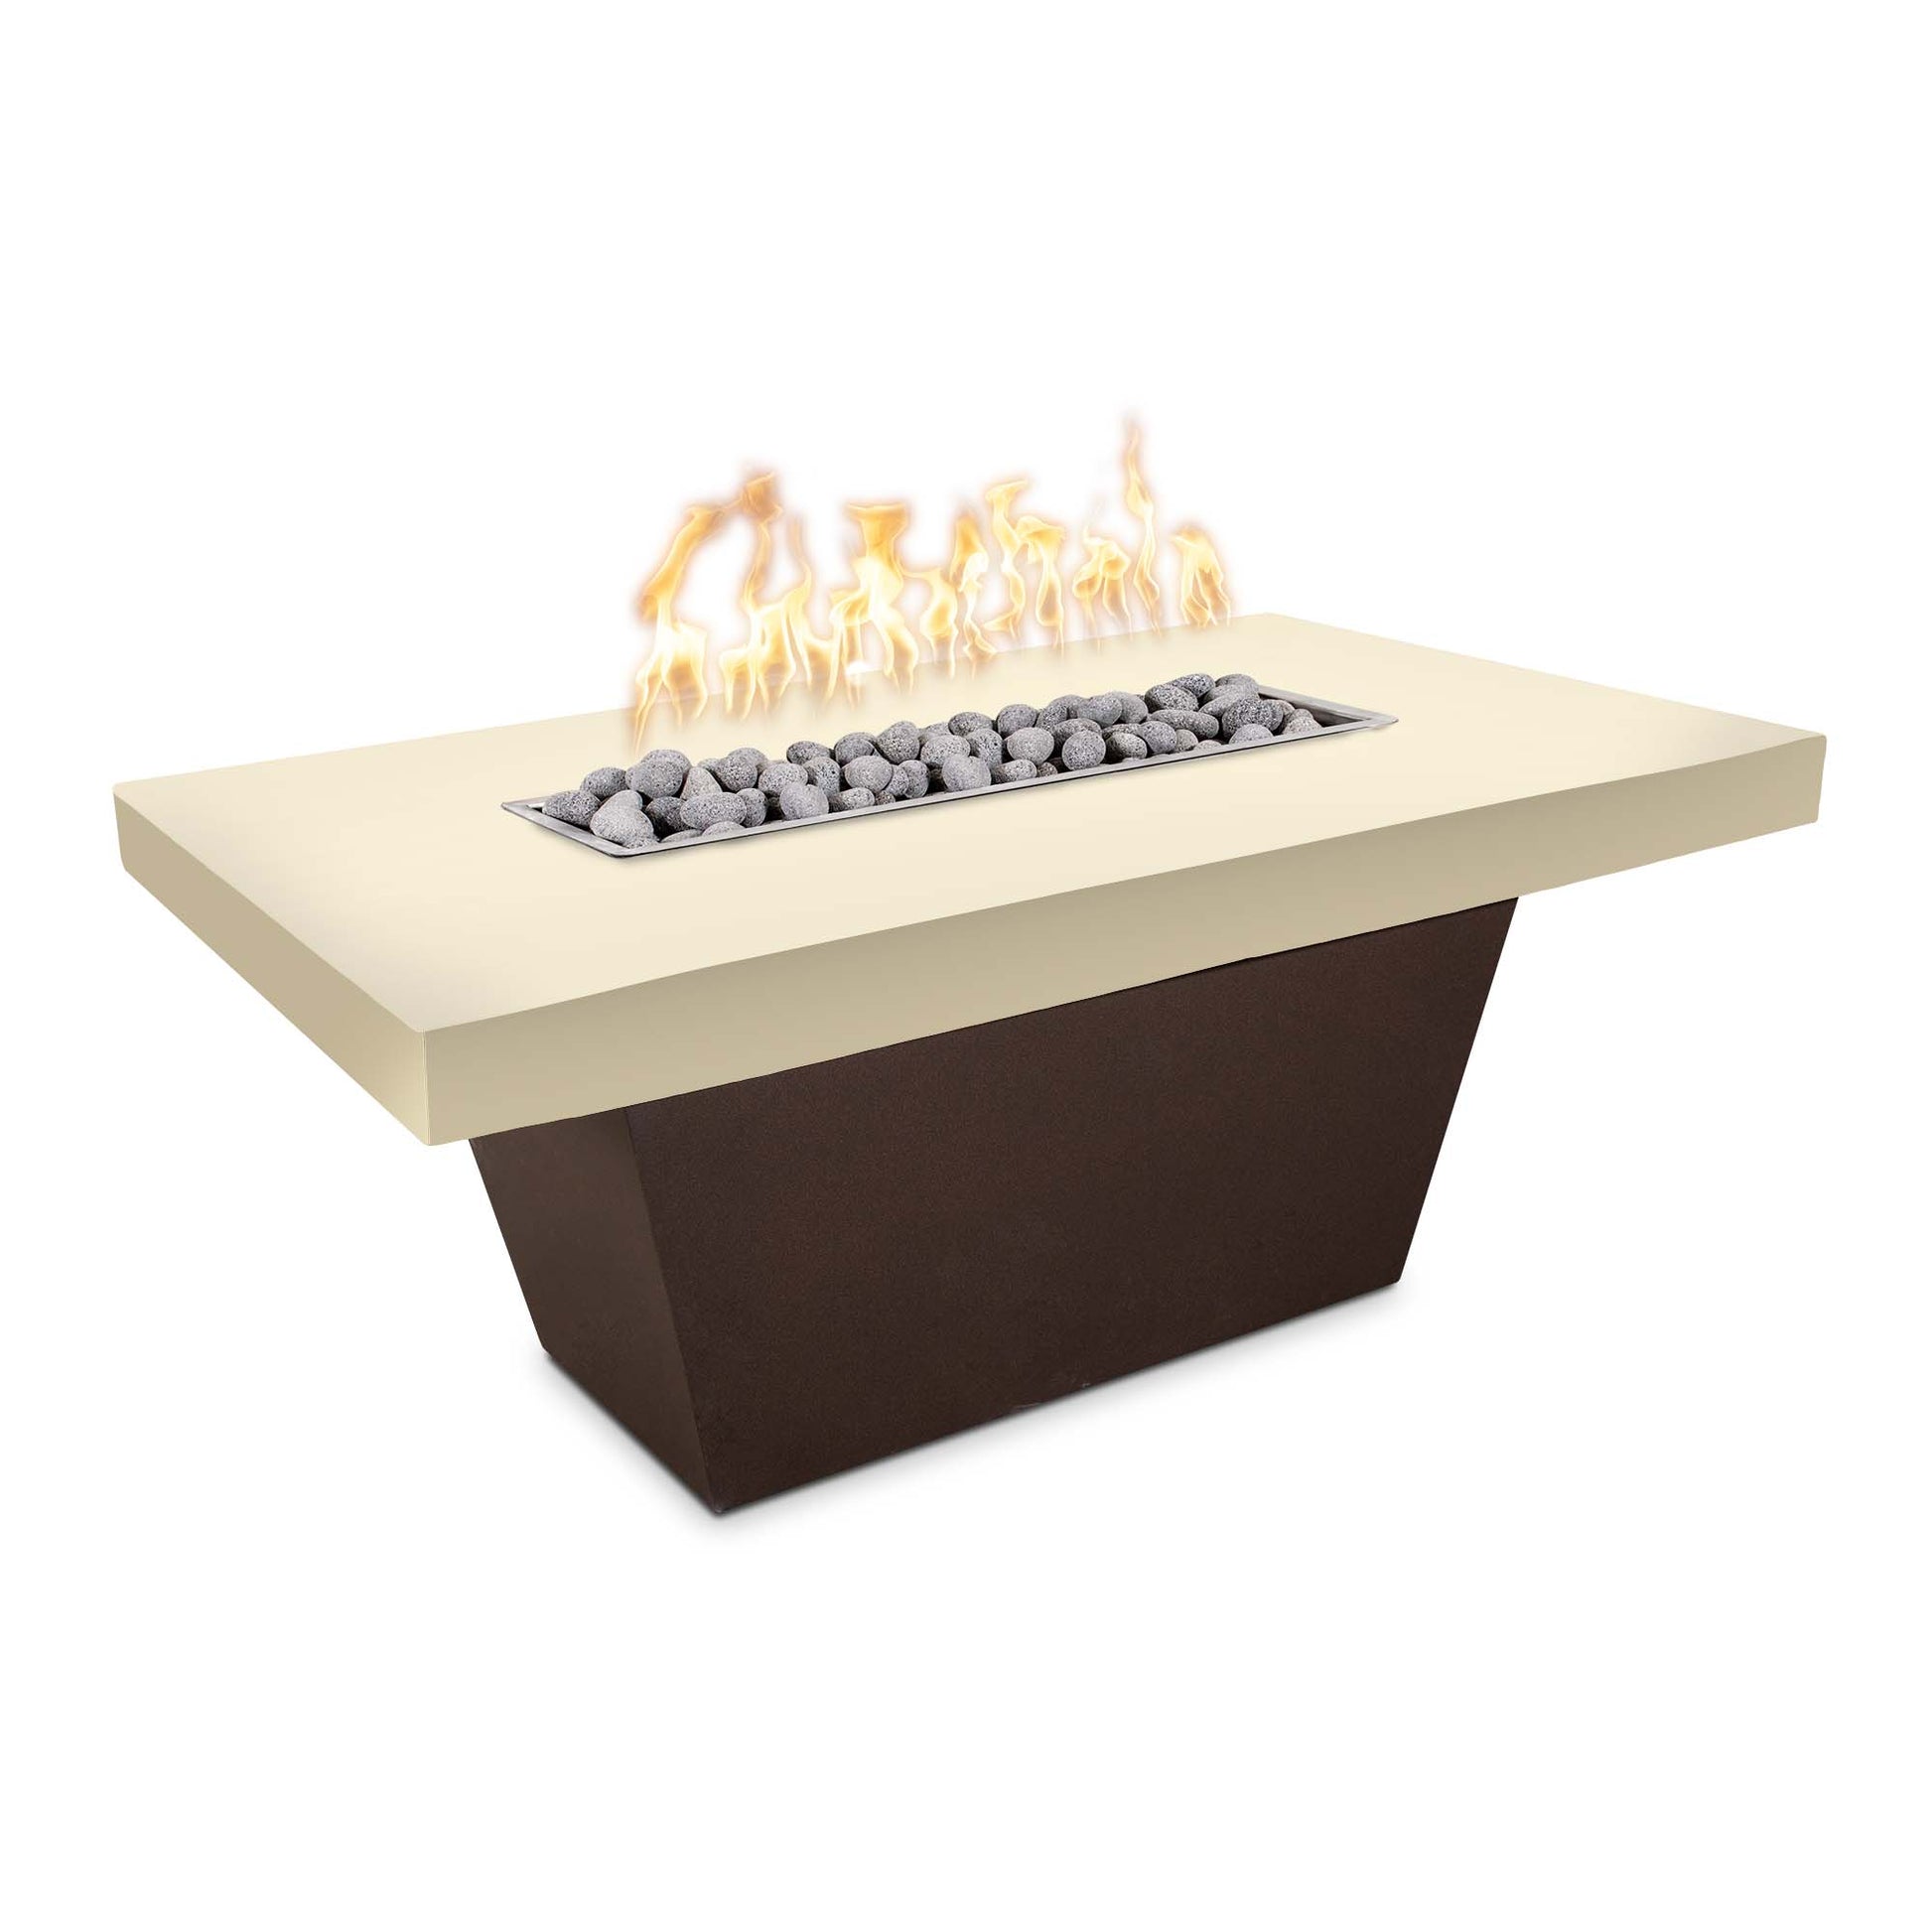 The Outdoor Plus Tacoma 48" Ash Concrete Top & Java Powder Coated Base Liquid Propane Fire Table with Match Lit Ignition